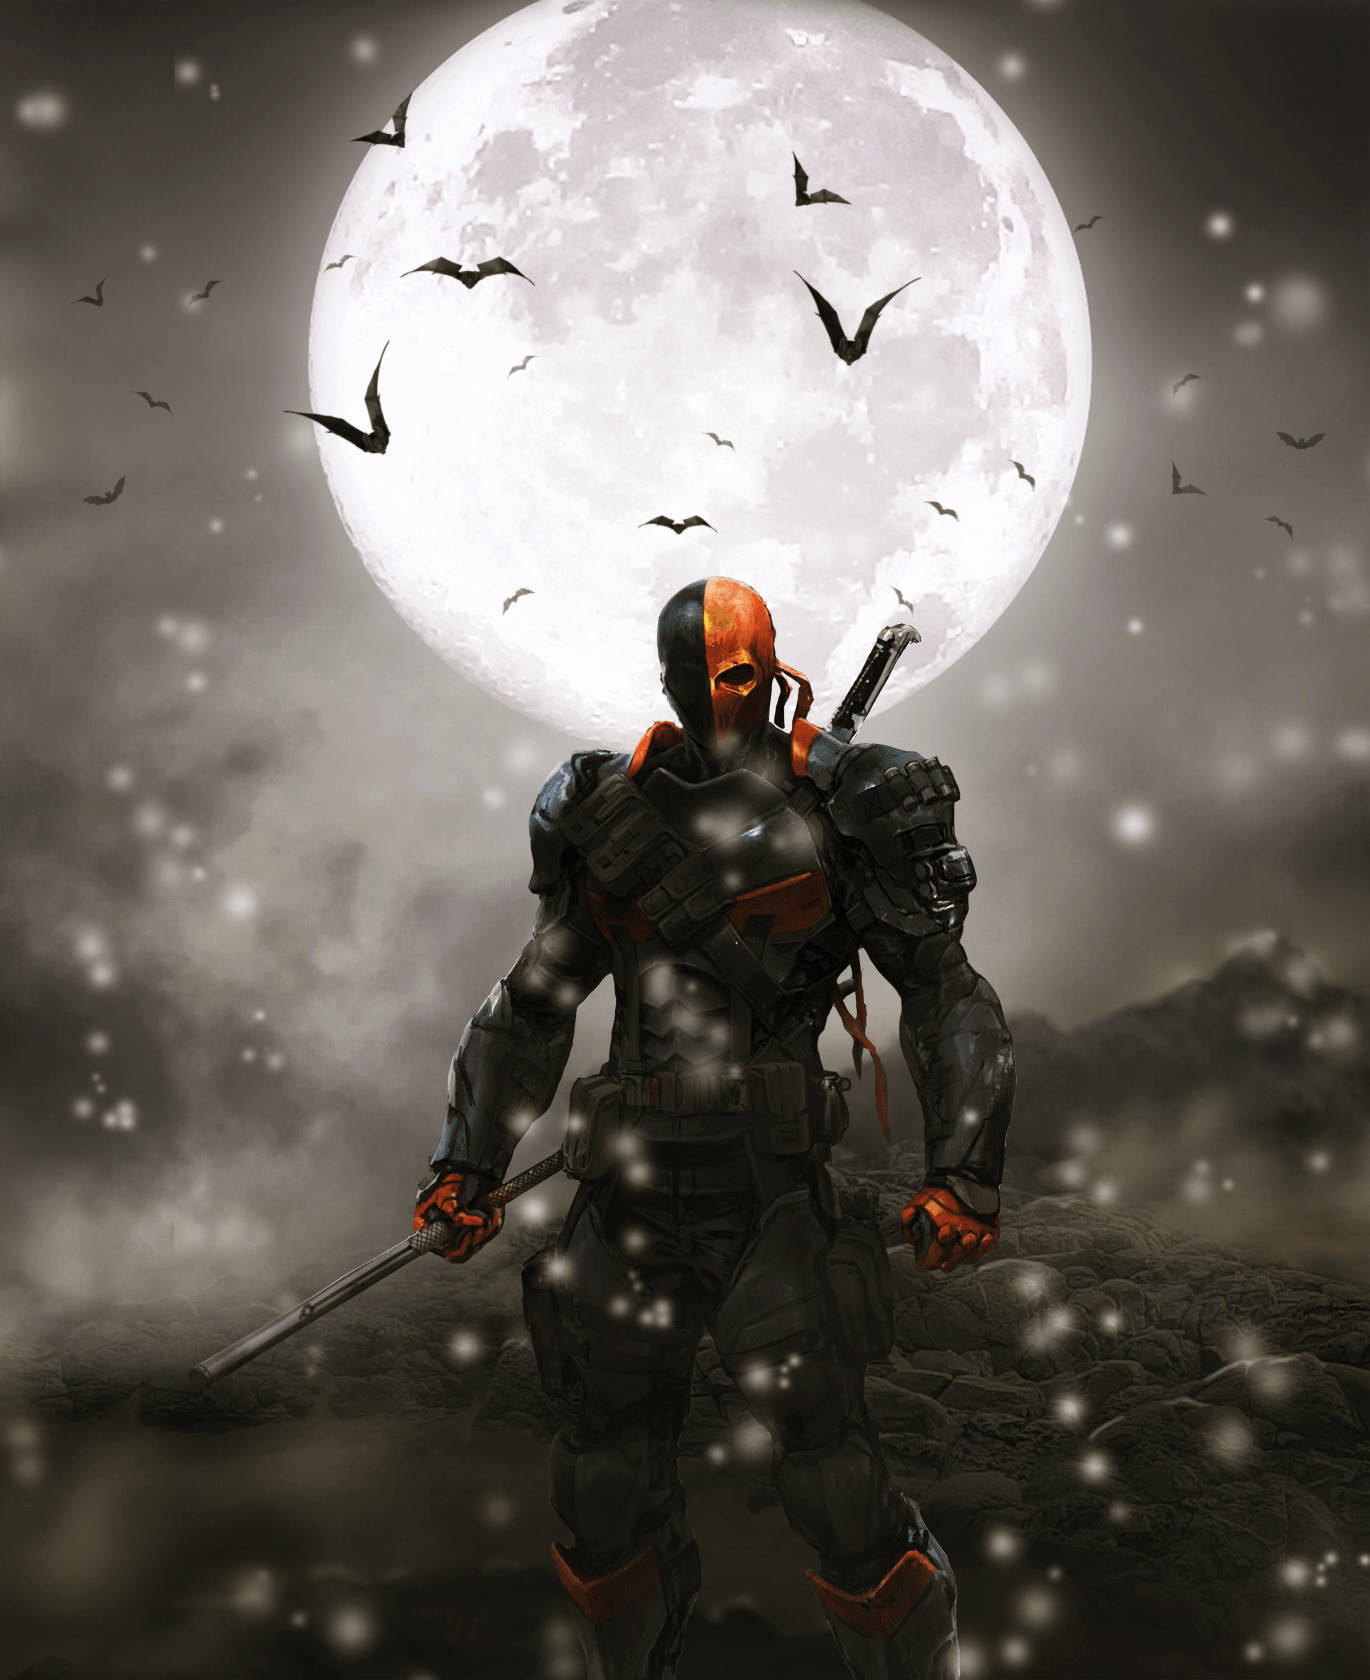 The menacing Deathstroke takes aim in the midst of a cosmic battlefield. Wallpaper